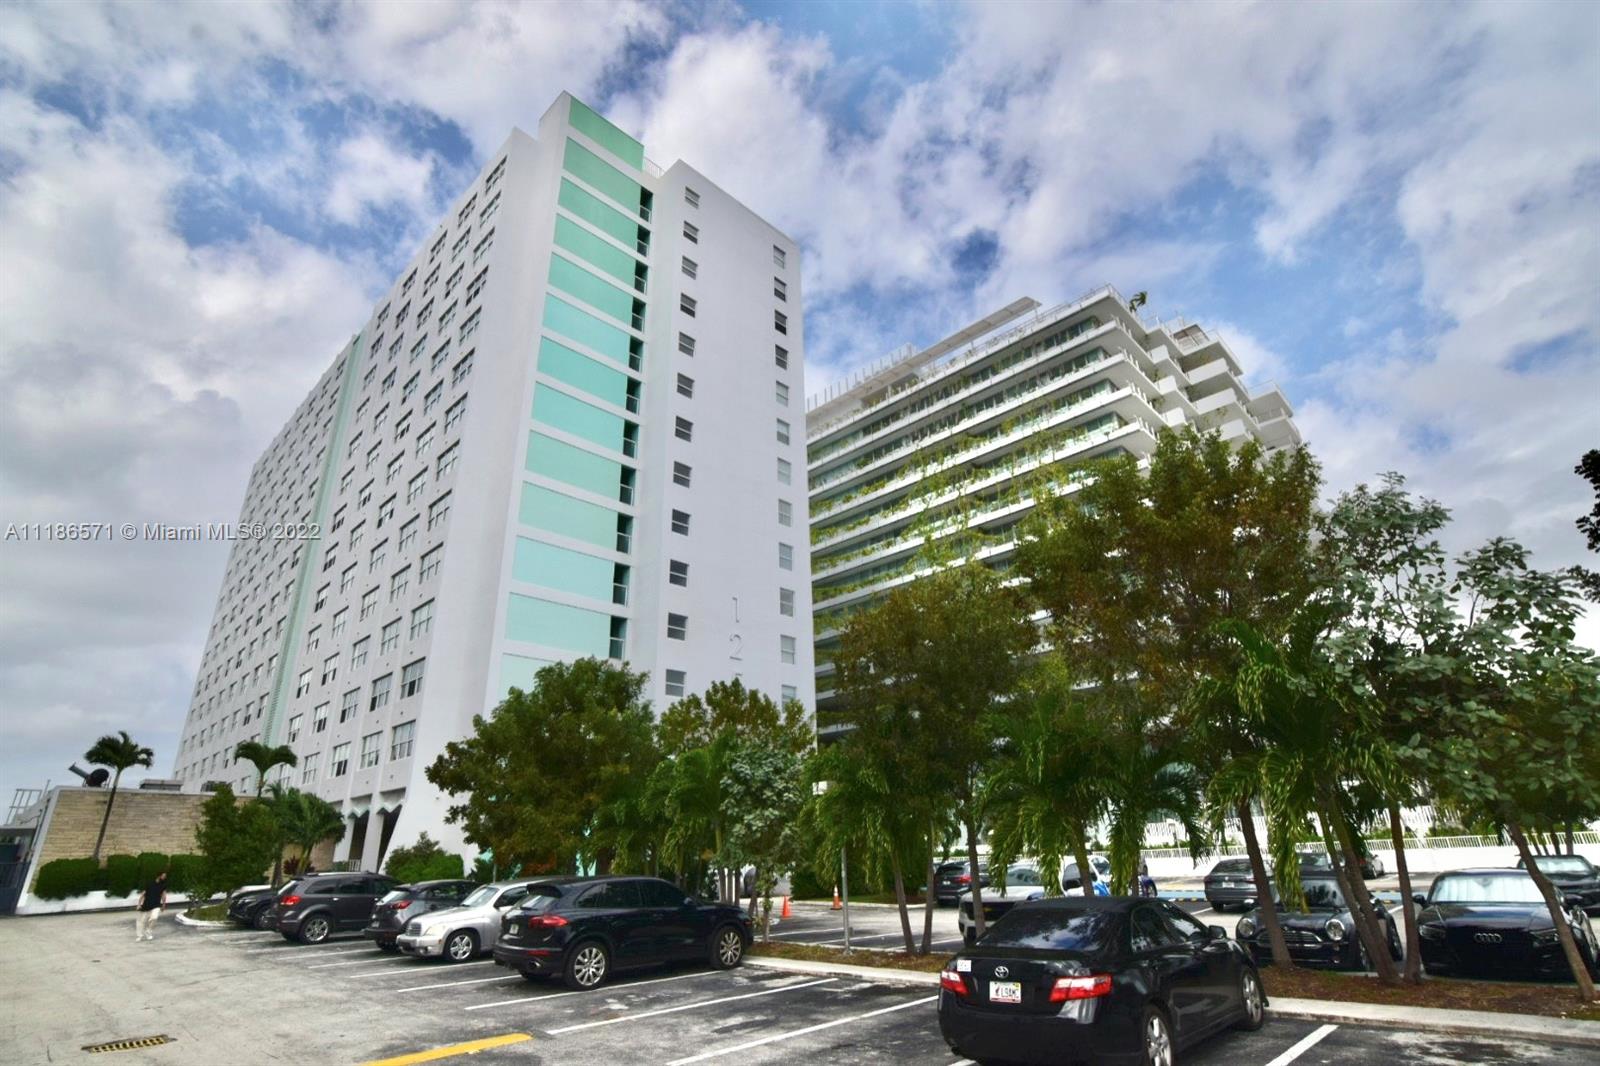 1250  West Ave #15J For Sale A11186571, FL